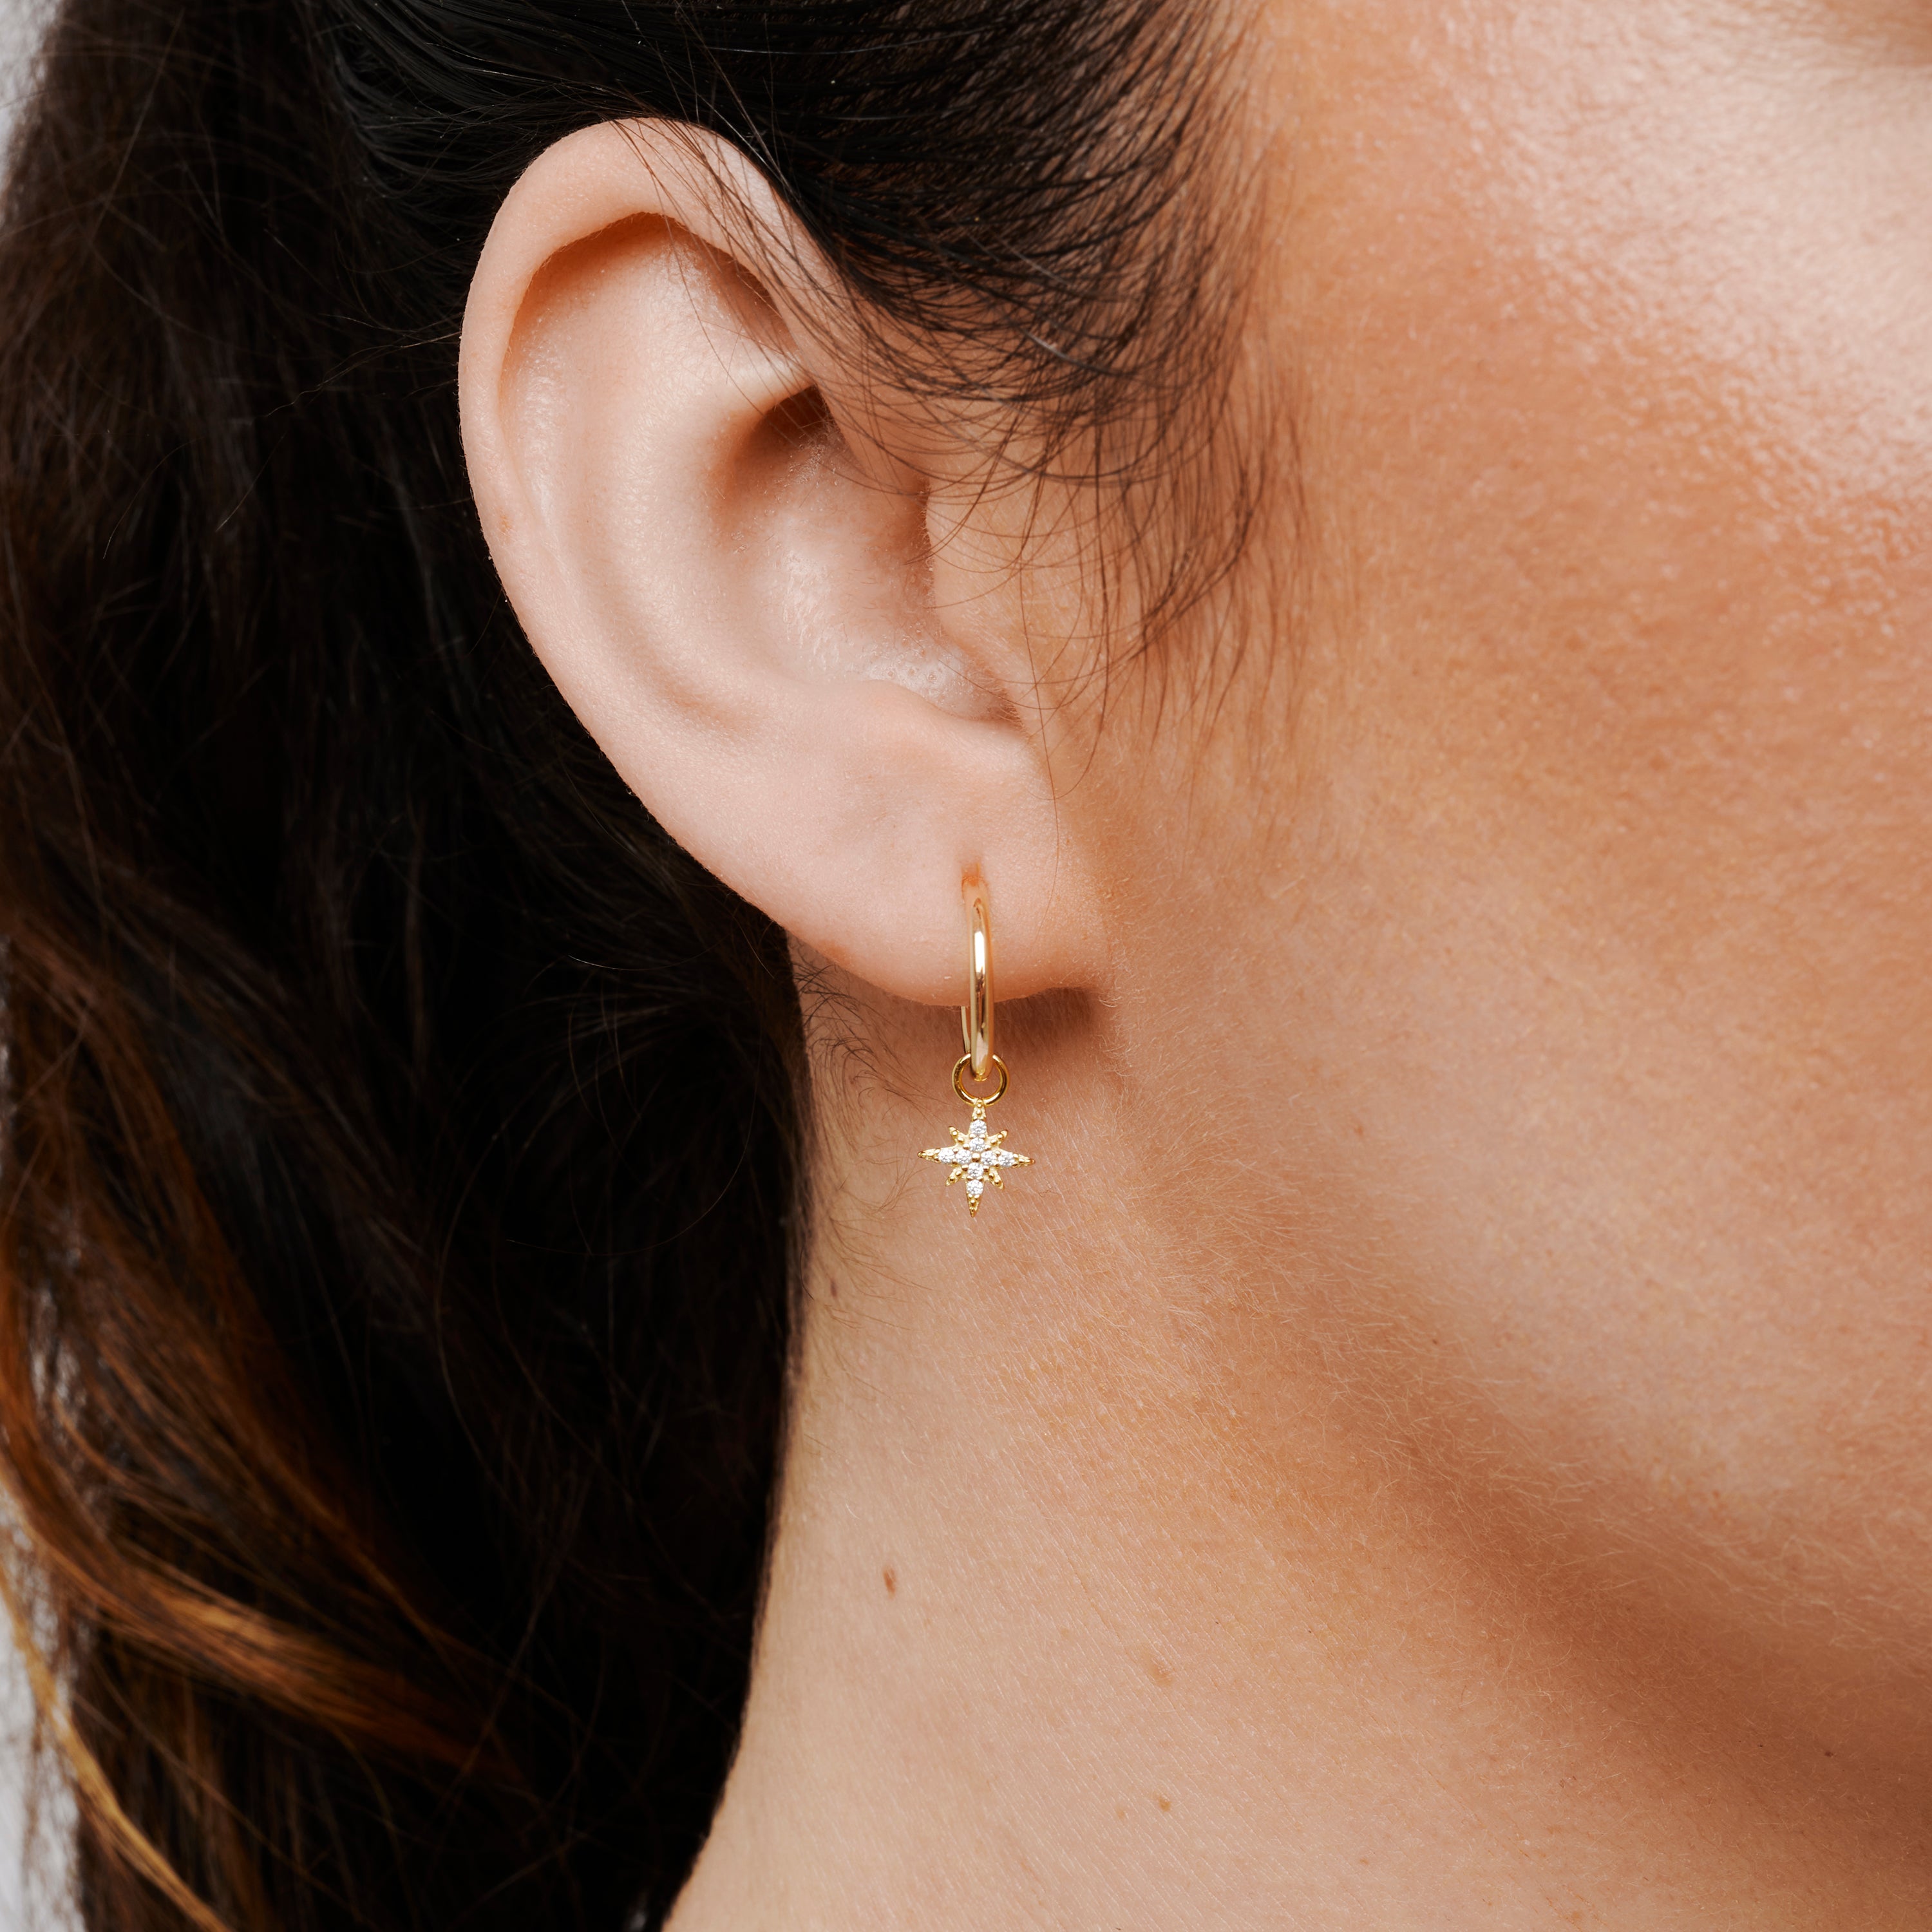 A model wearing the Star Hoop Charms in Gold are made with high-quality materials, including 18K gold plating over 925 Sterling Silver. These charms are both non-tarnish and water resistant. The perfect combination of style and durability.